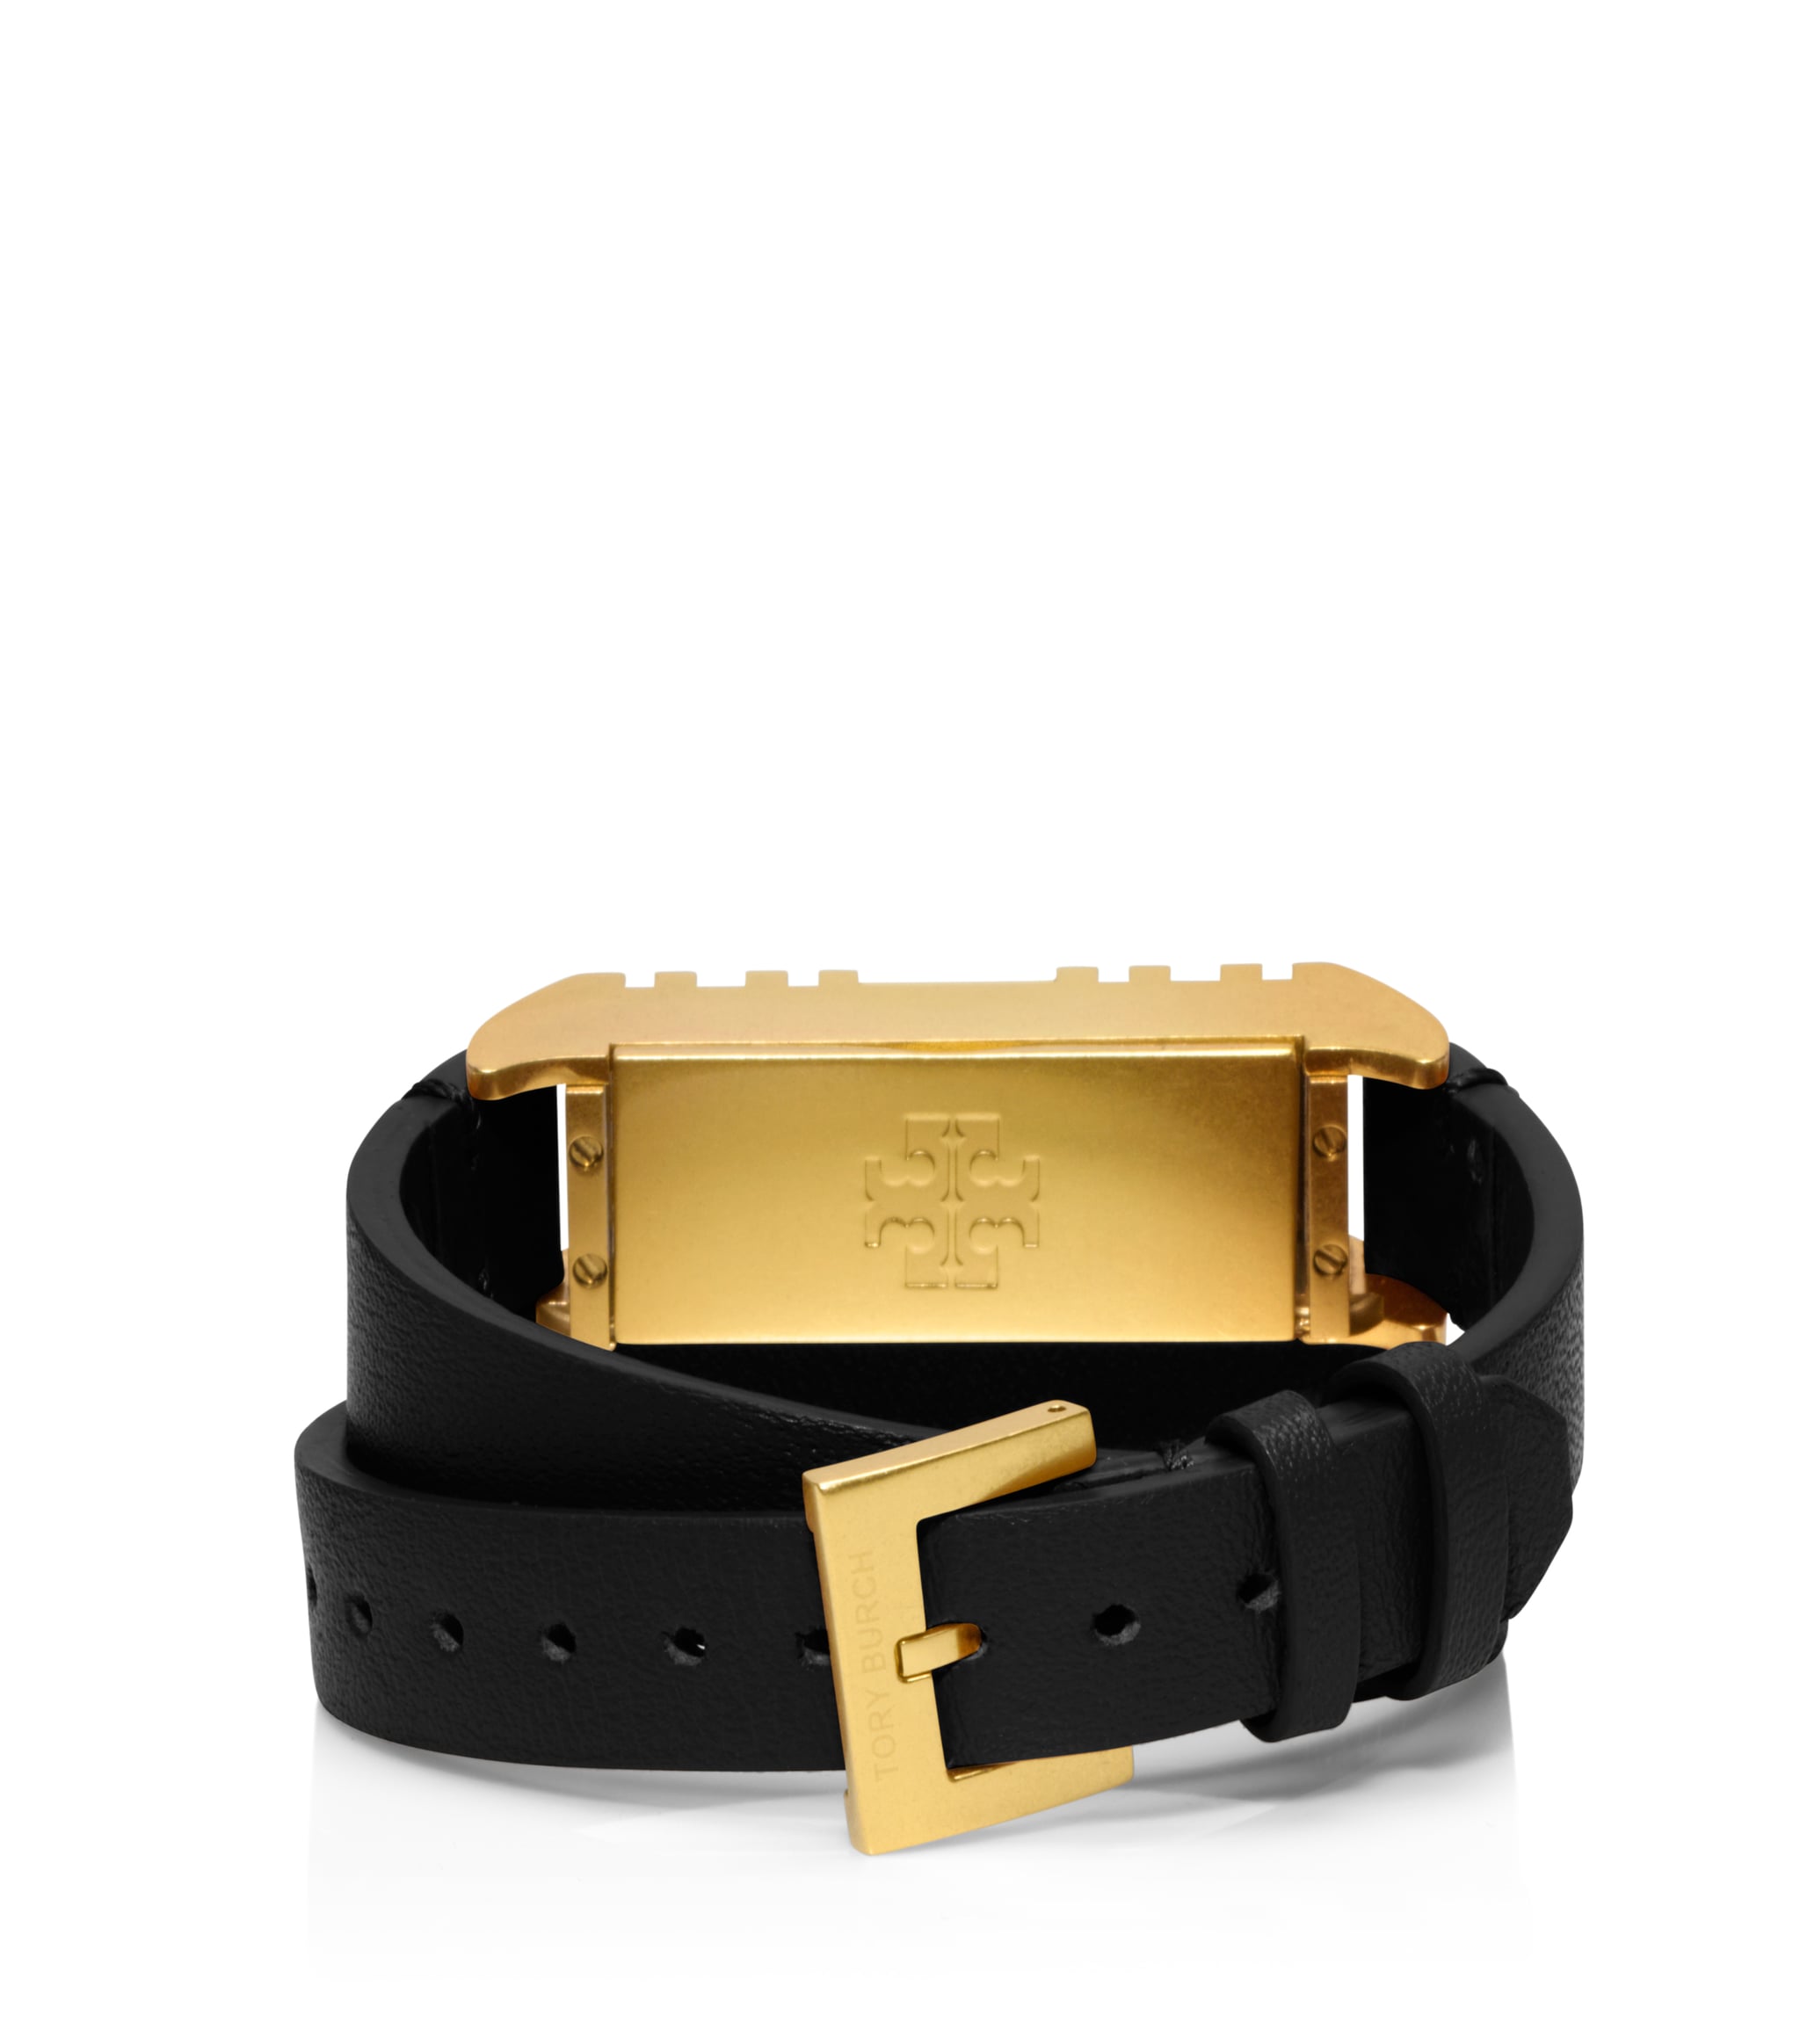 Tory Burch For Fitbit Fret Double-Wrap Bracelet in Black/Shiny Brass | Tory  Burch and Fitbit Just Released Their Chicest Collaboration Yet | POPSUGAR  Fitness Photo 3